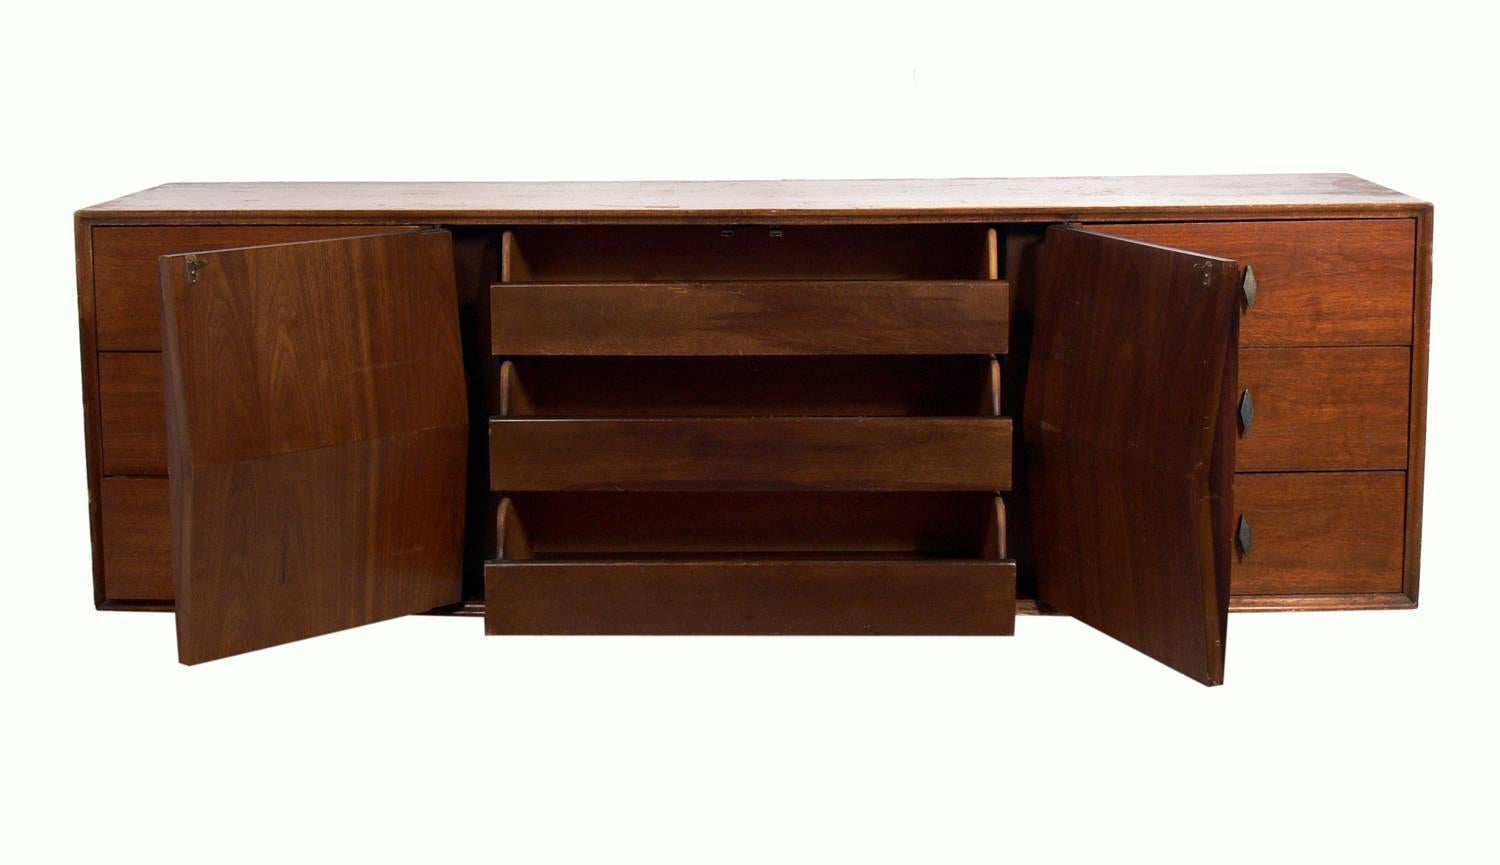 American Sculptural Mid-Century Modern Wall-Mounted Credenza